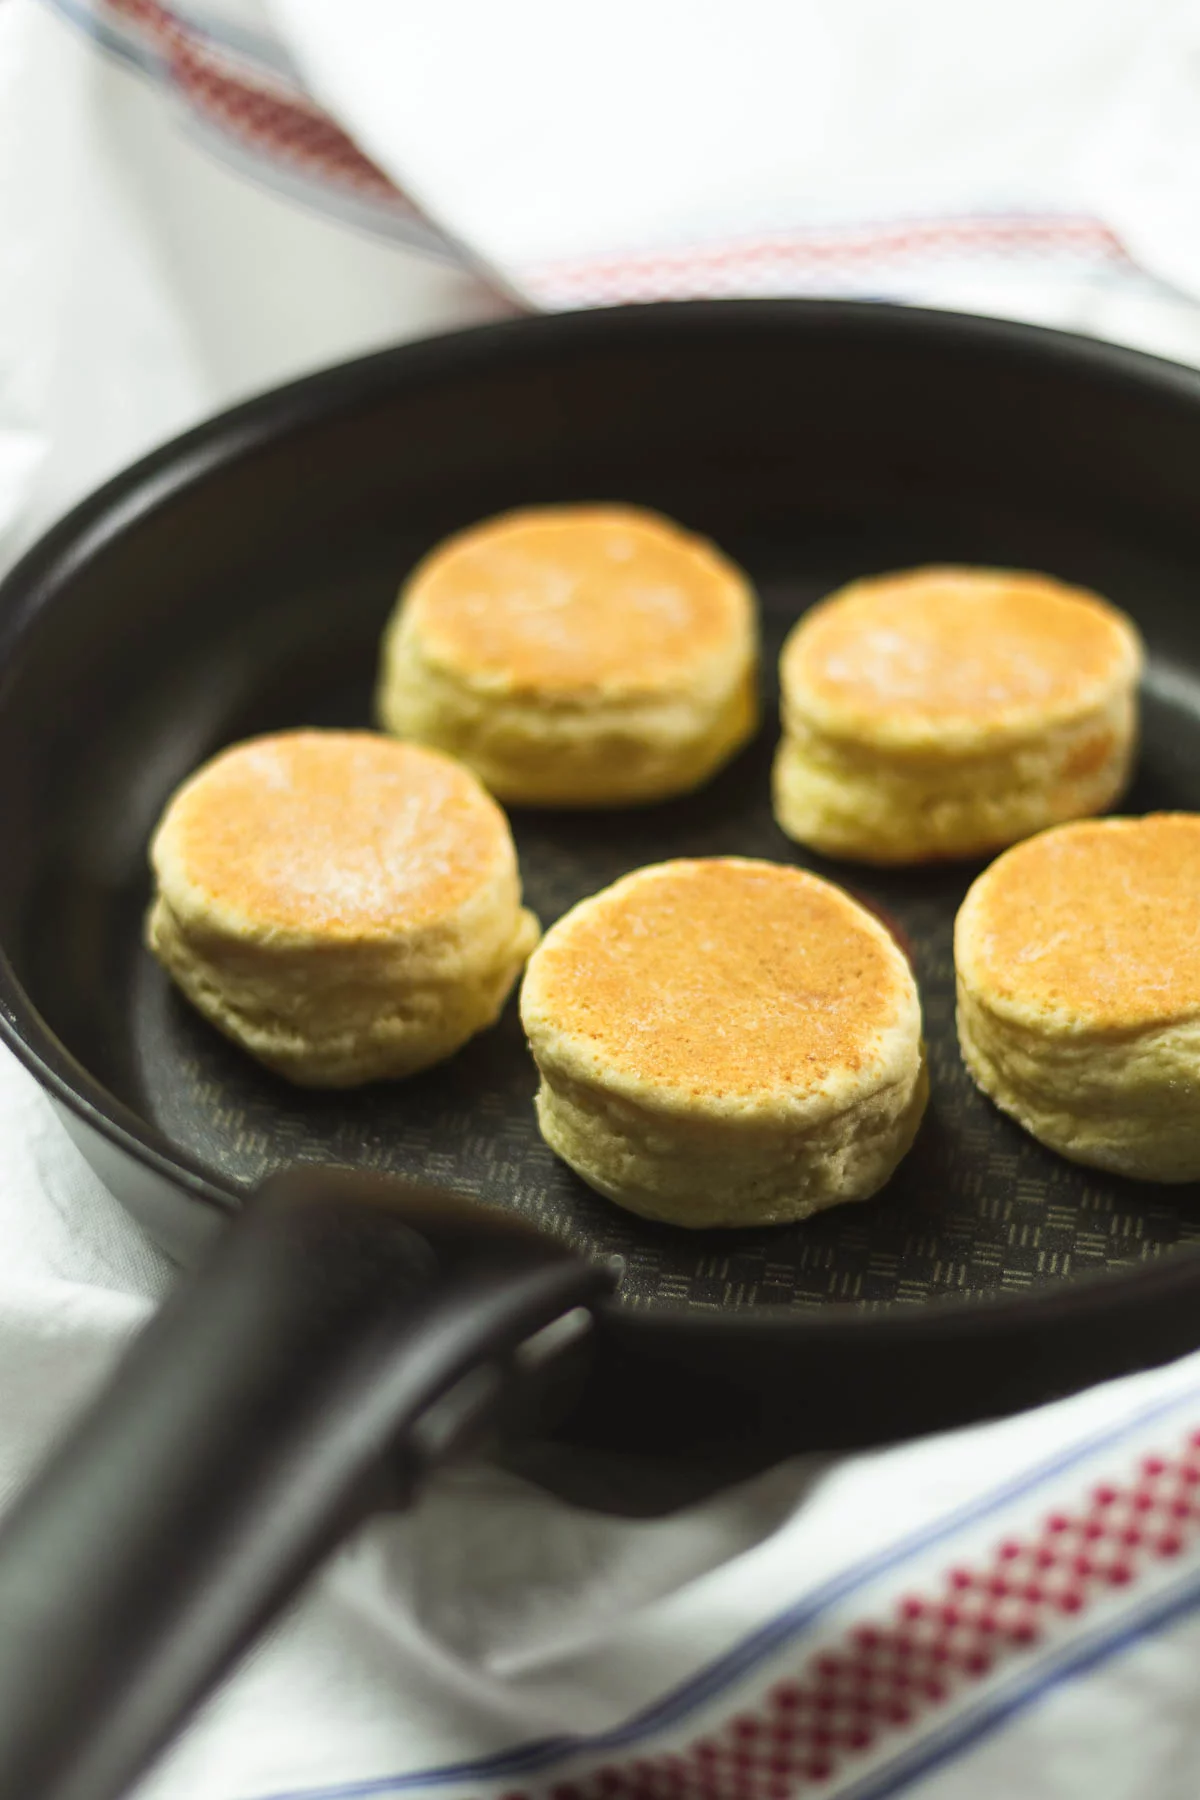 Recipe for scones made in a frying pan [without an oven